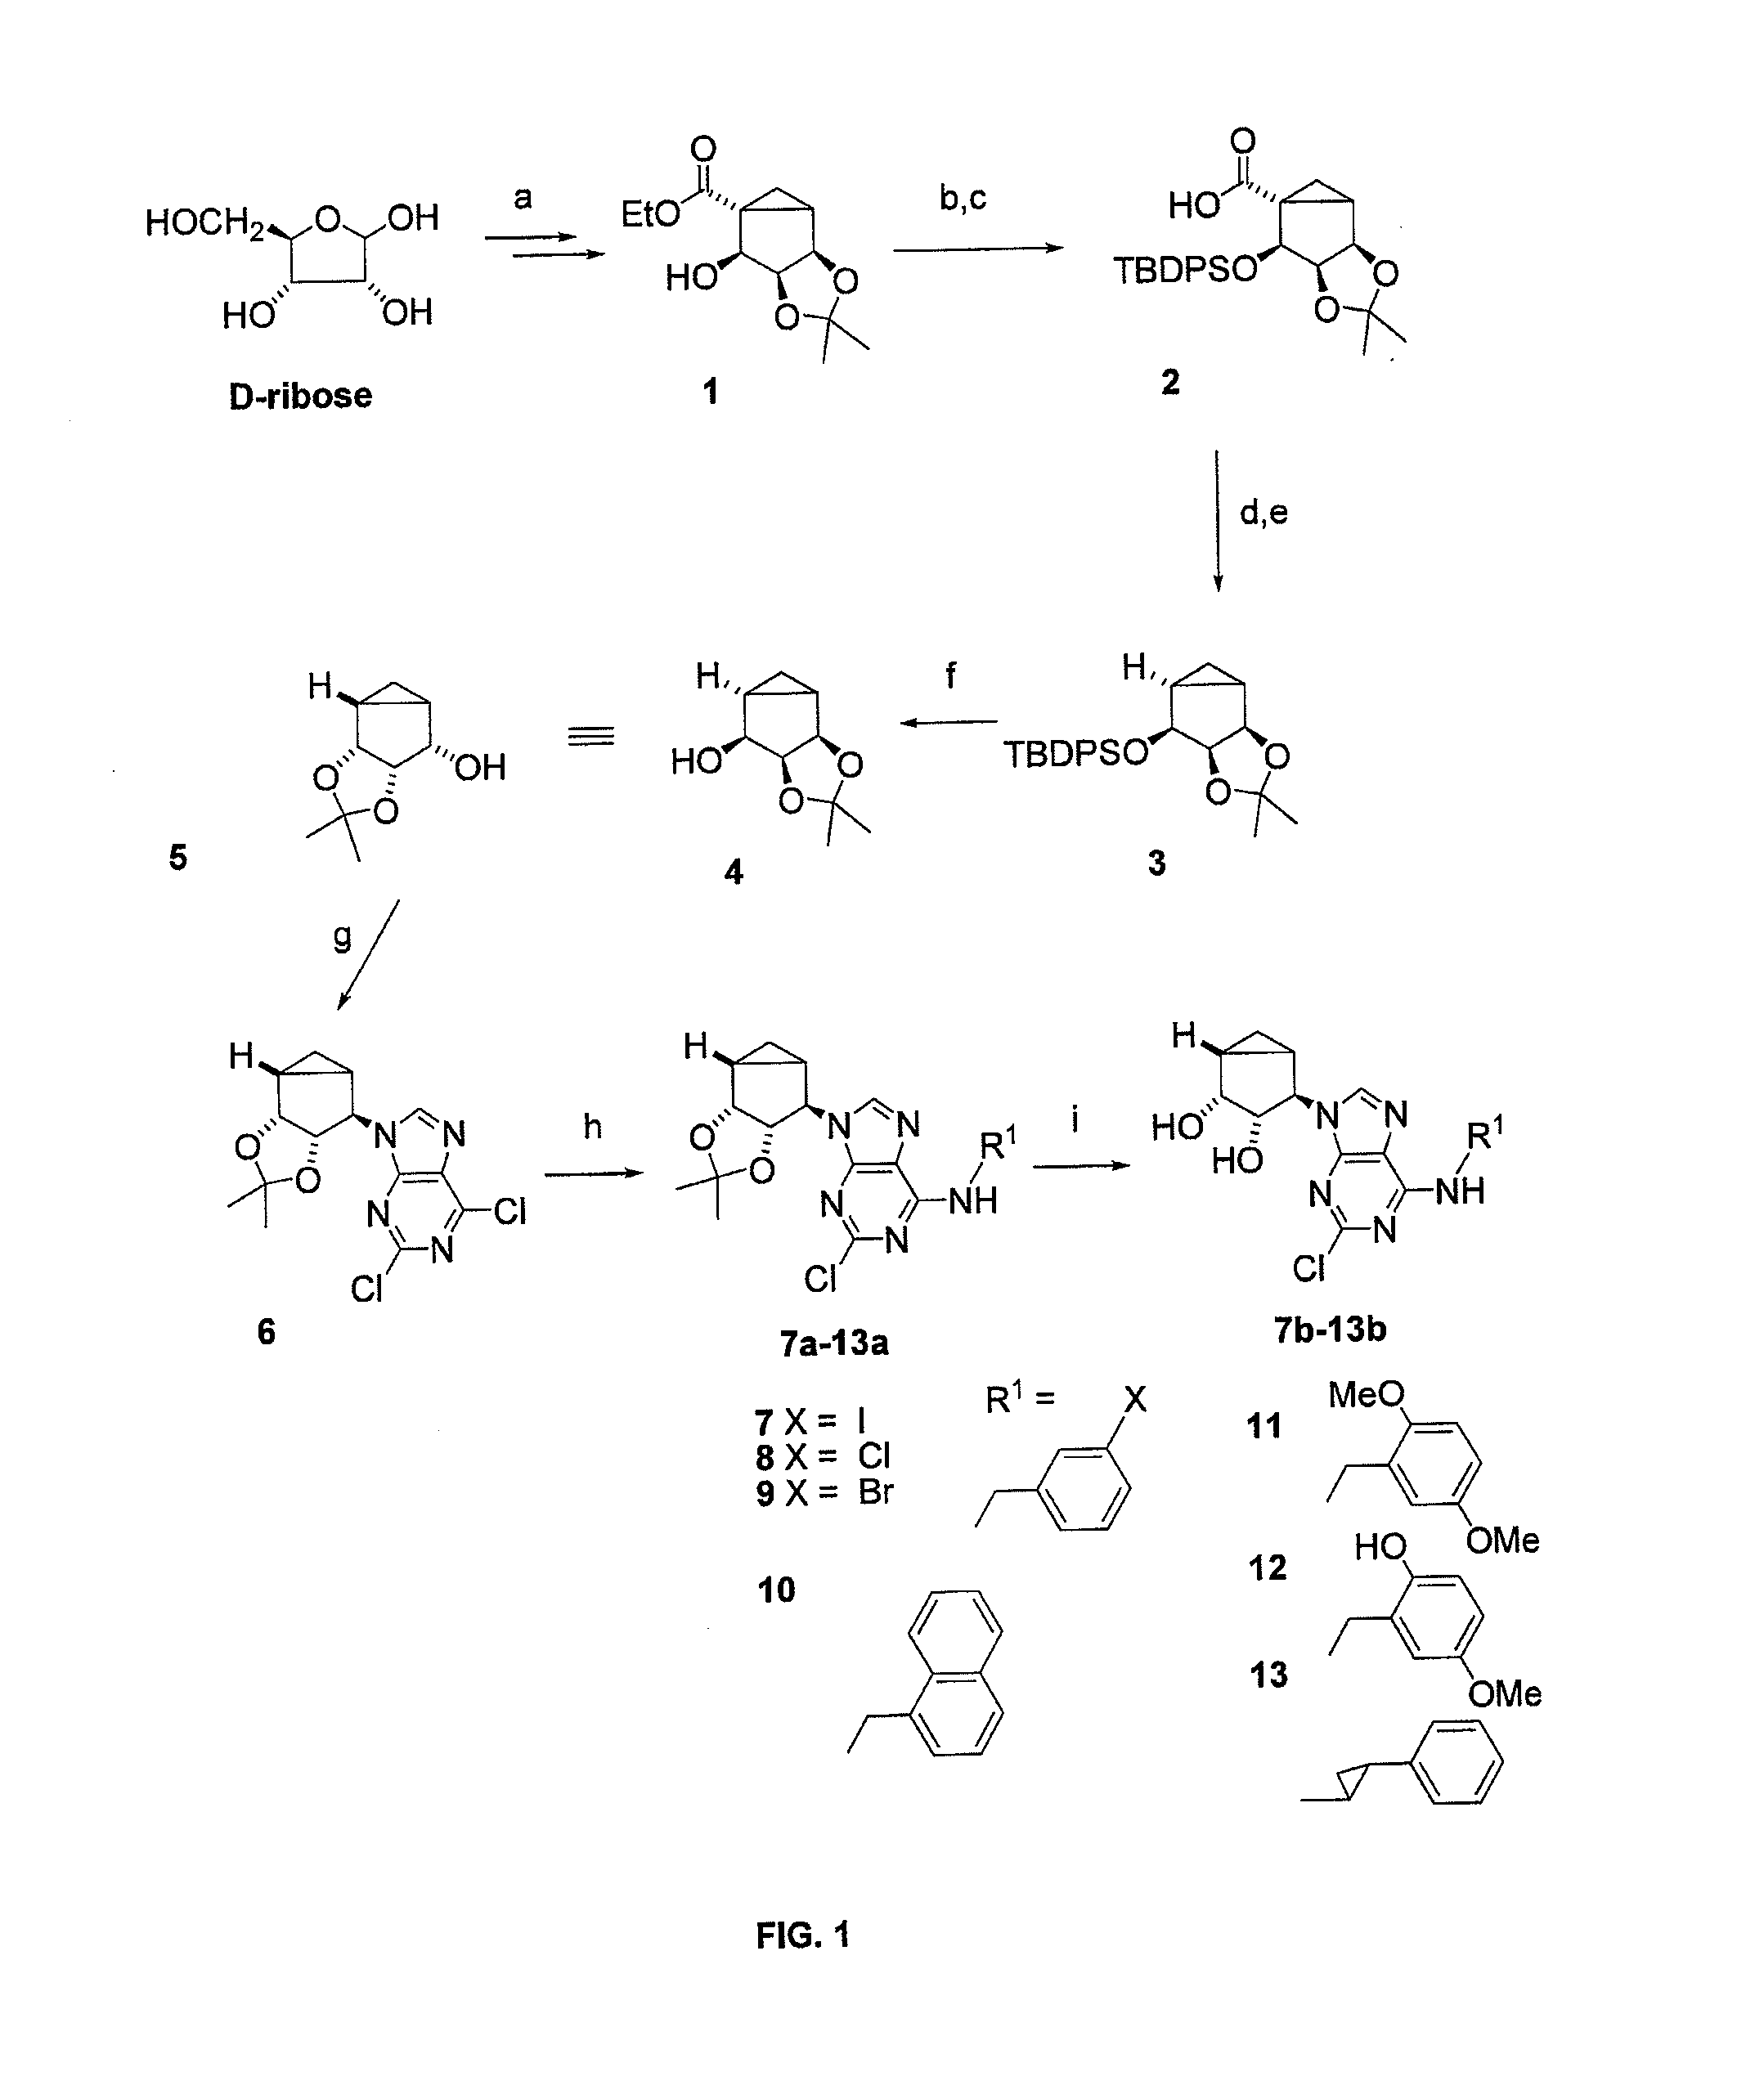 A3 adenosine receptor antagonists and partial agonists